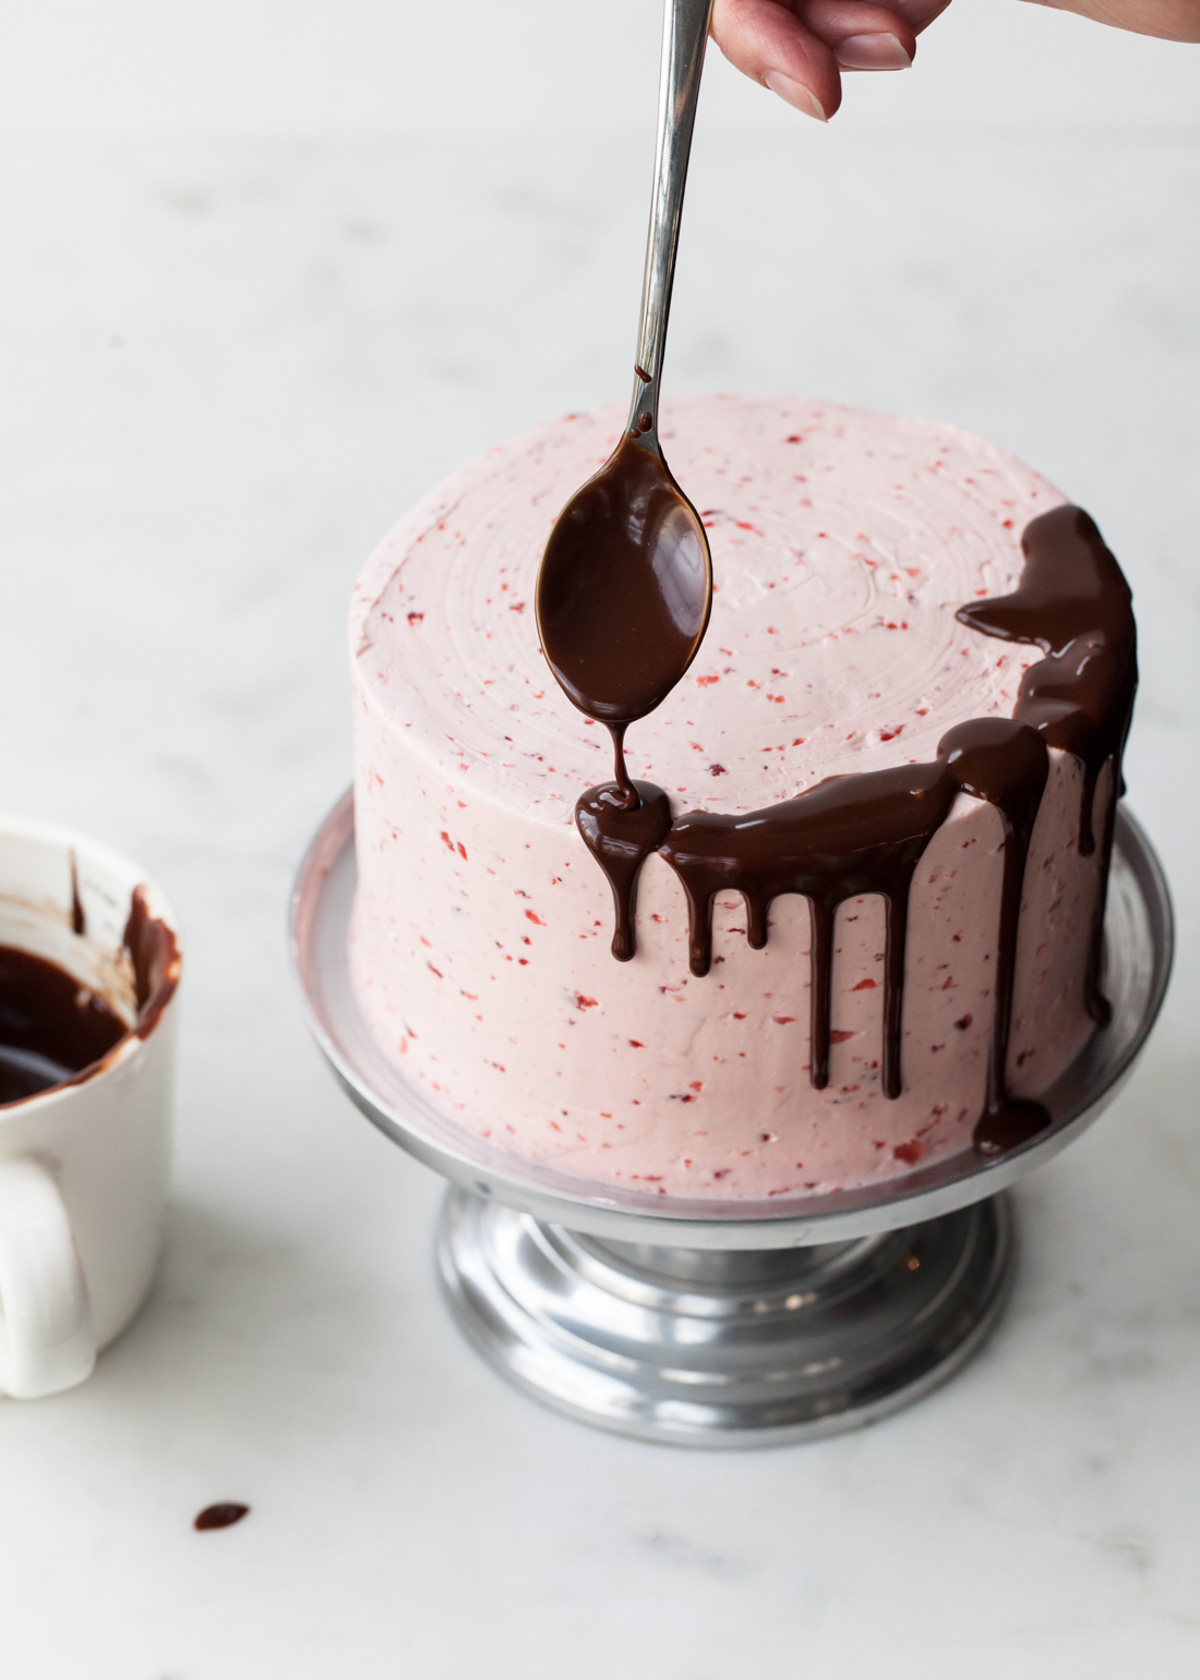 Making a chocolate drip cake with a spoon